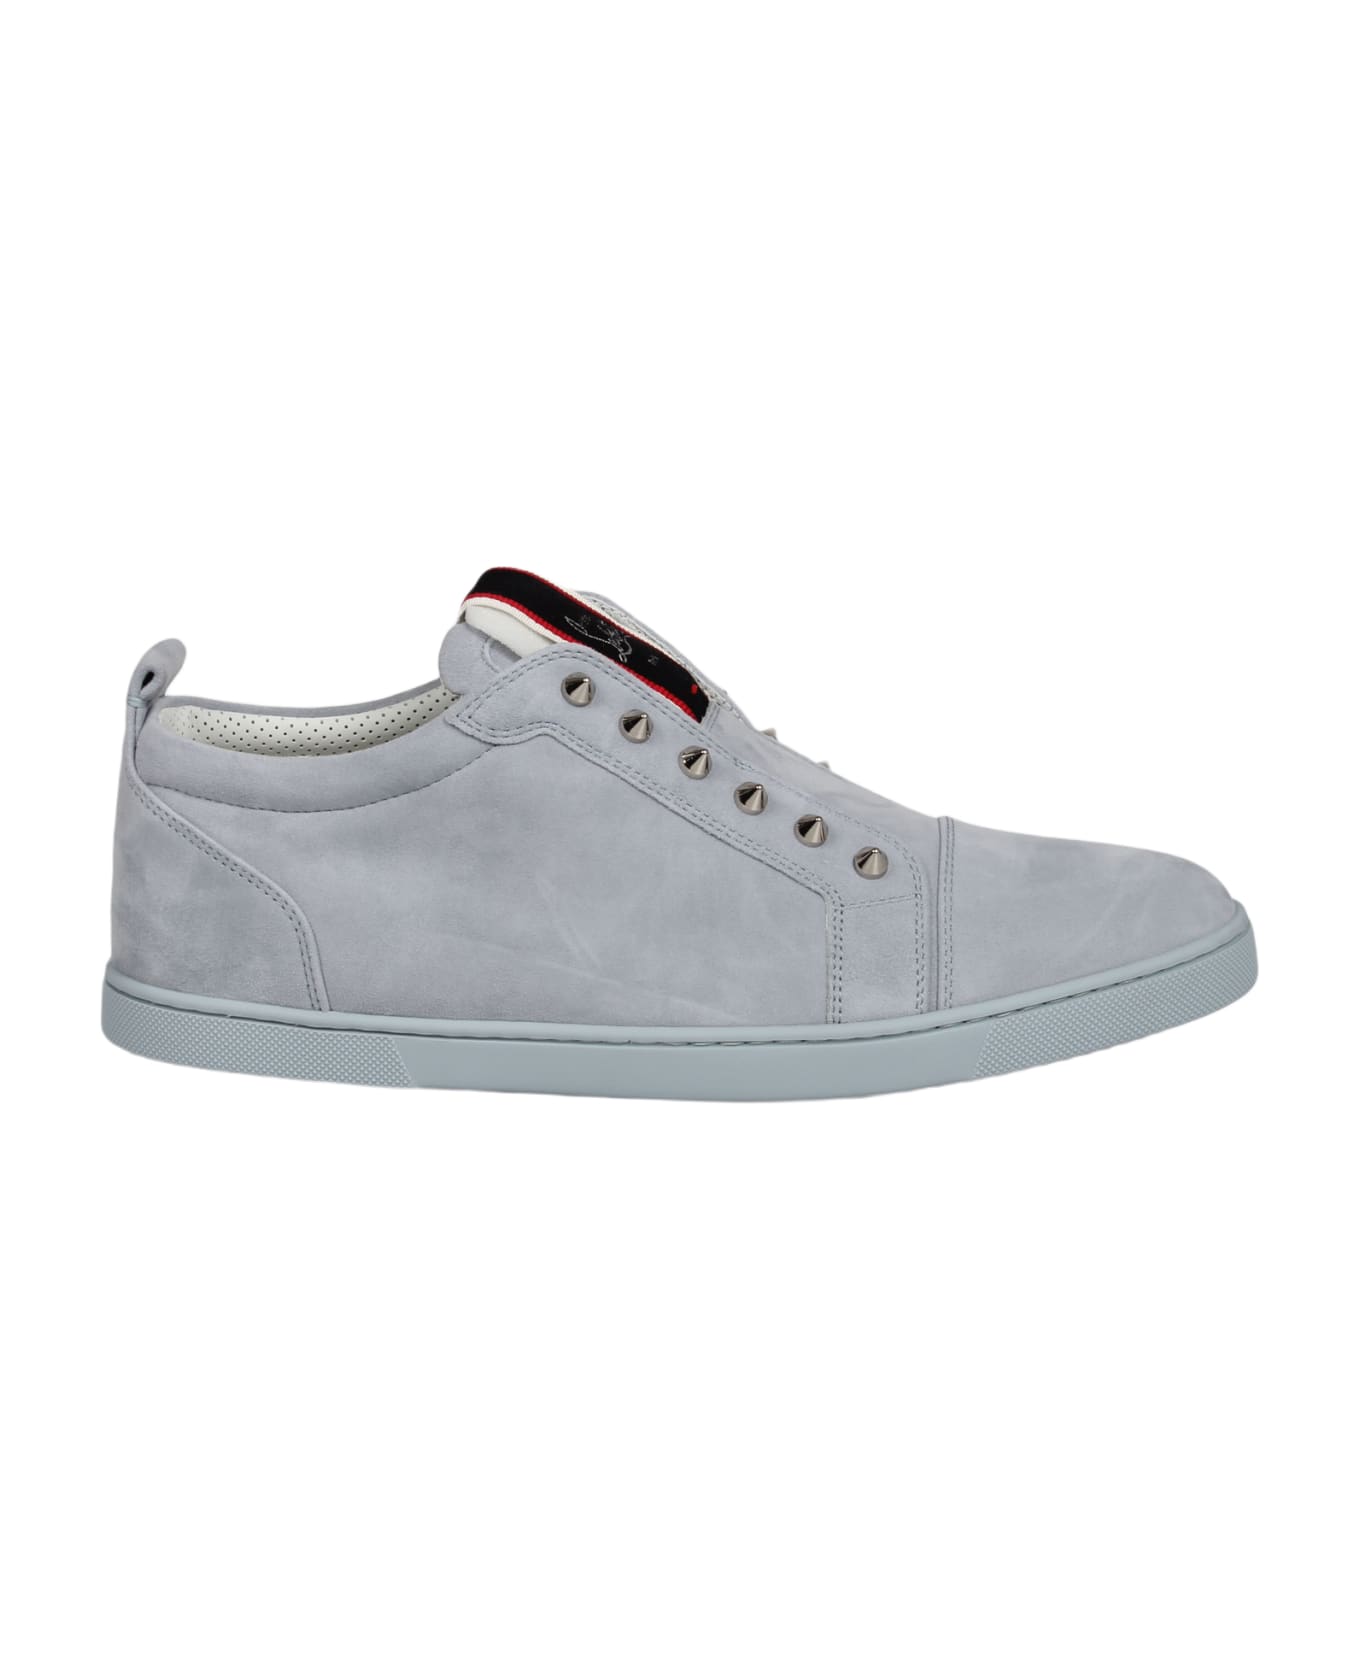 Christian Louboutin F.a.v Fique A Vontade Flat Sneakers - Blue